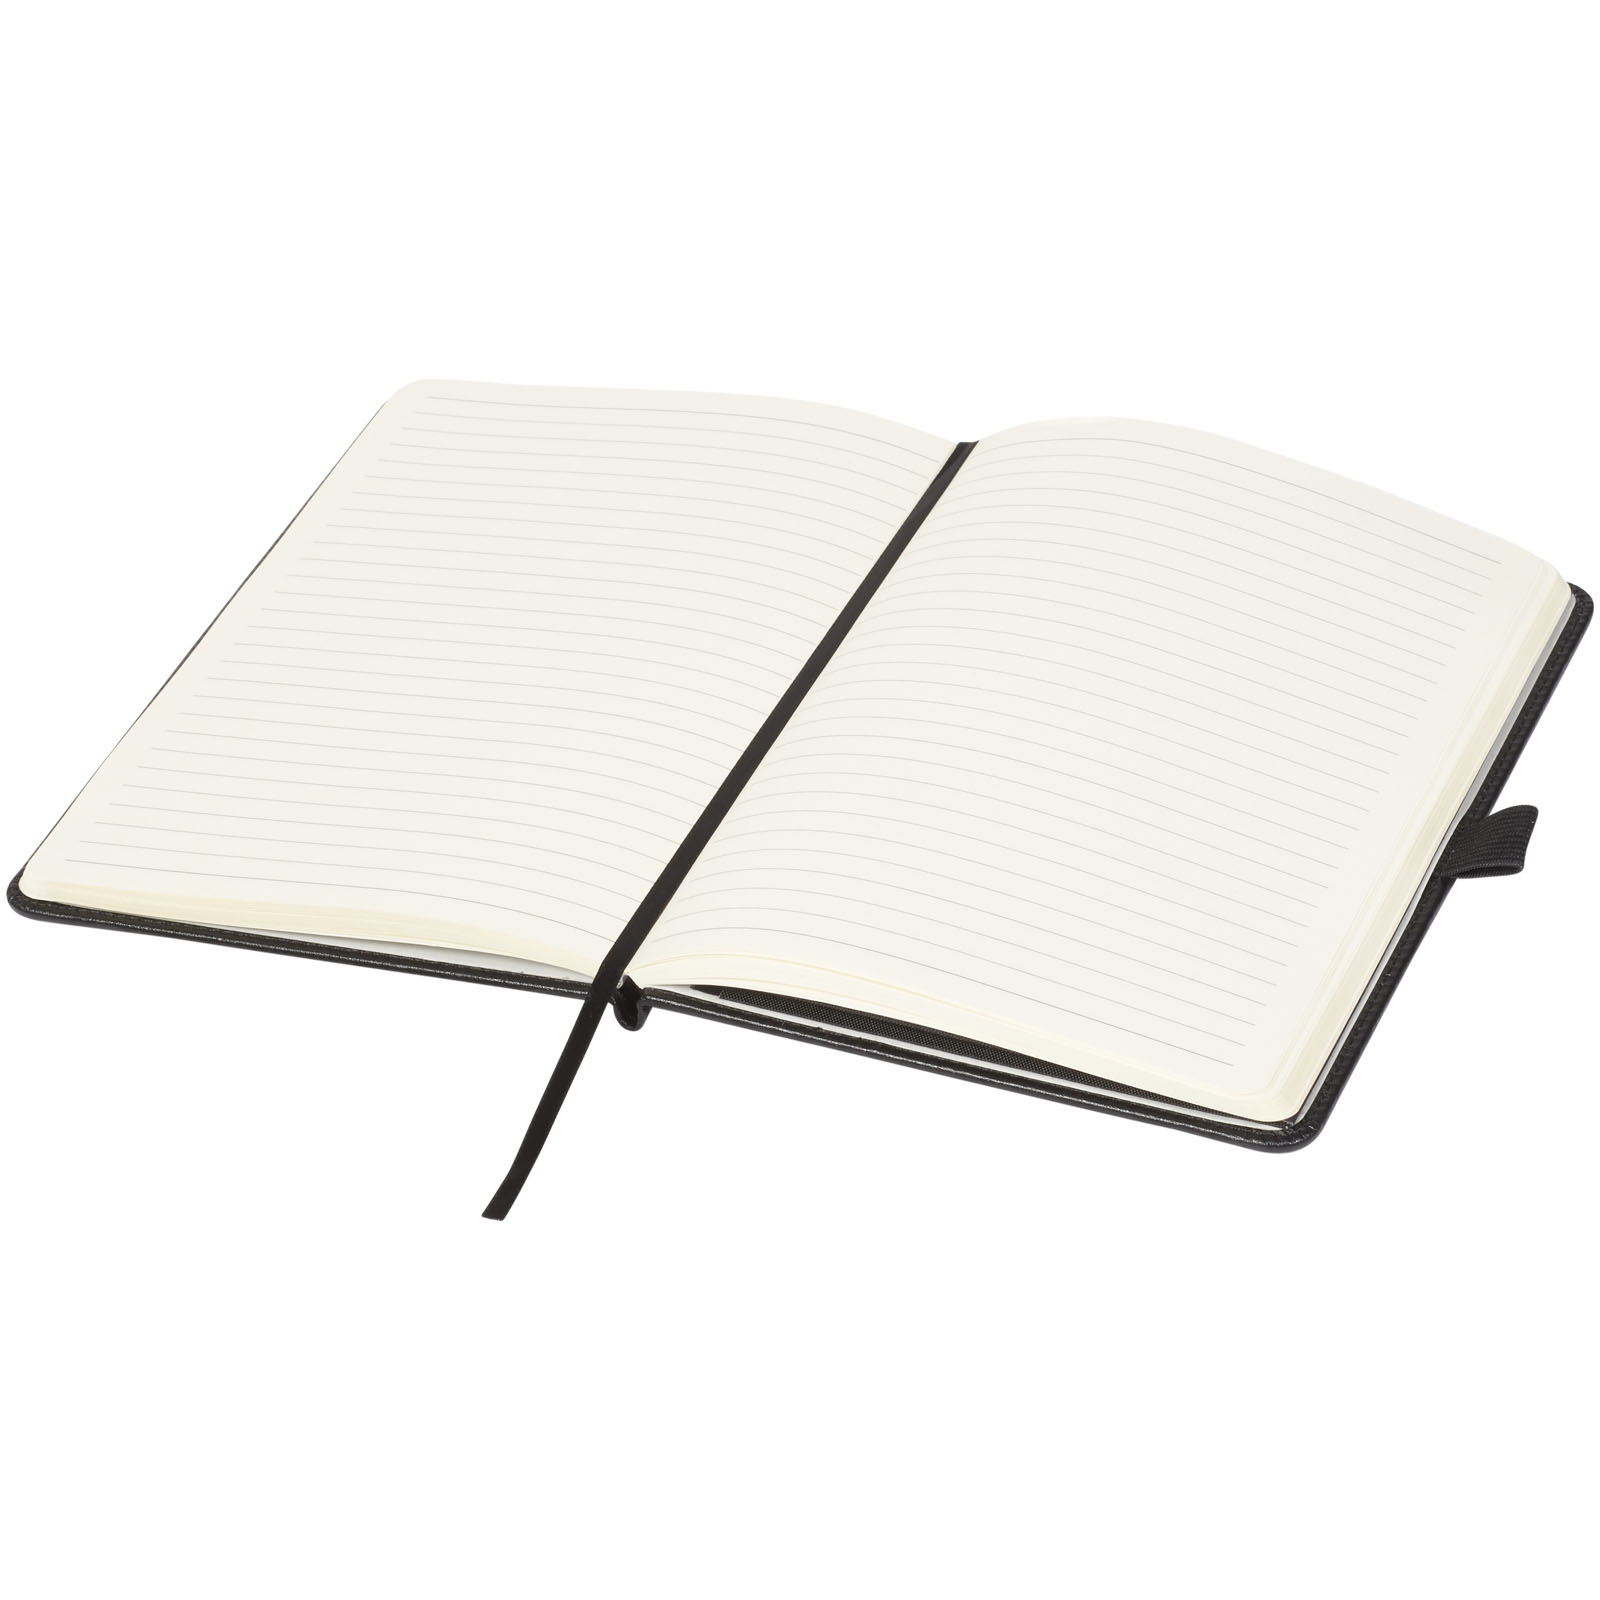 Advertising Hard cover notebooks - Bound A5 notebook - 6